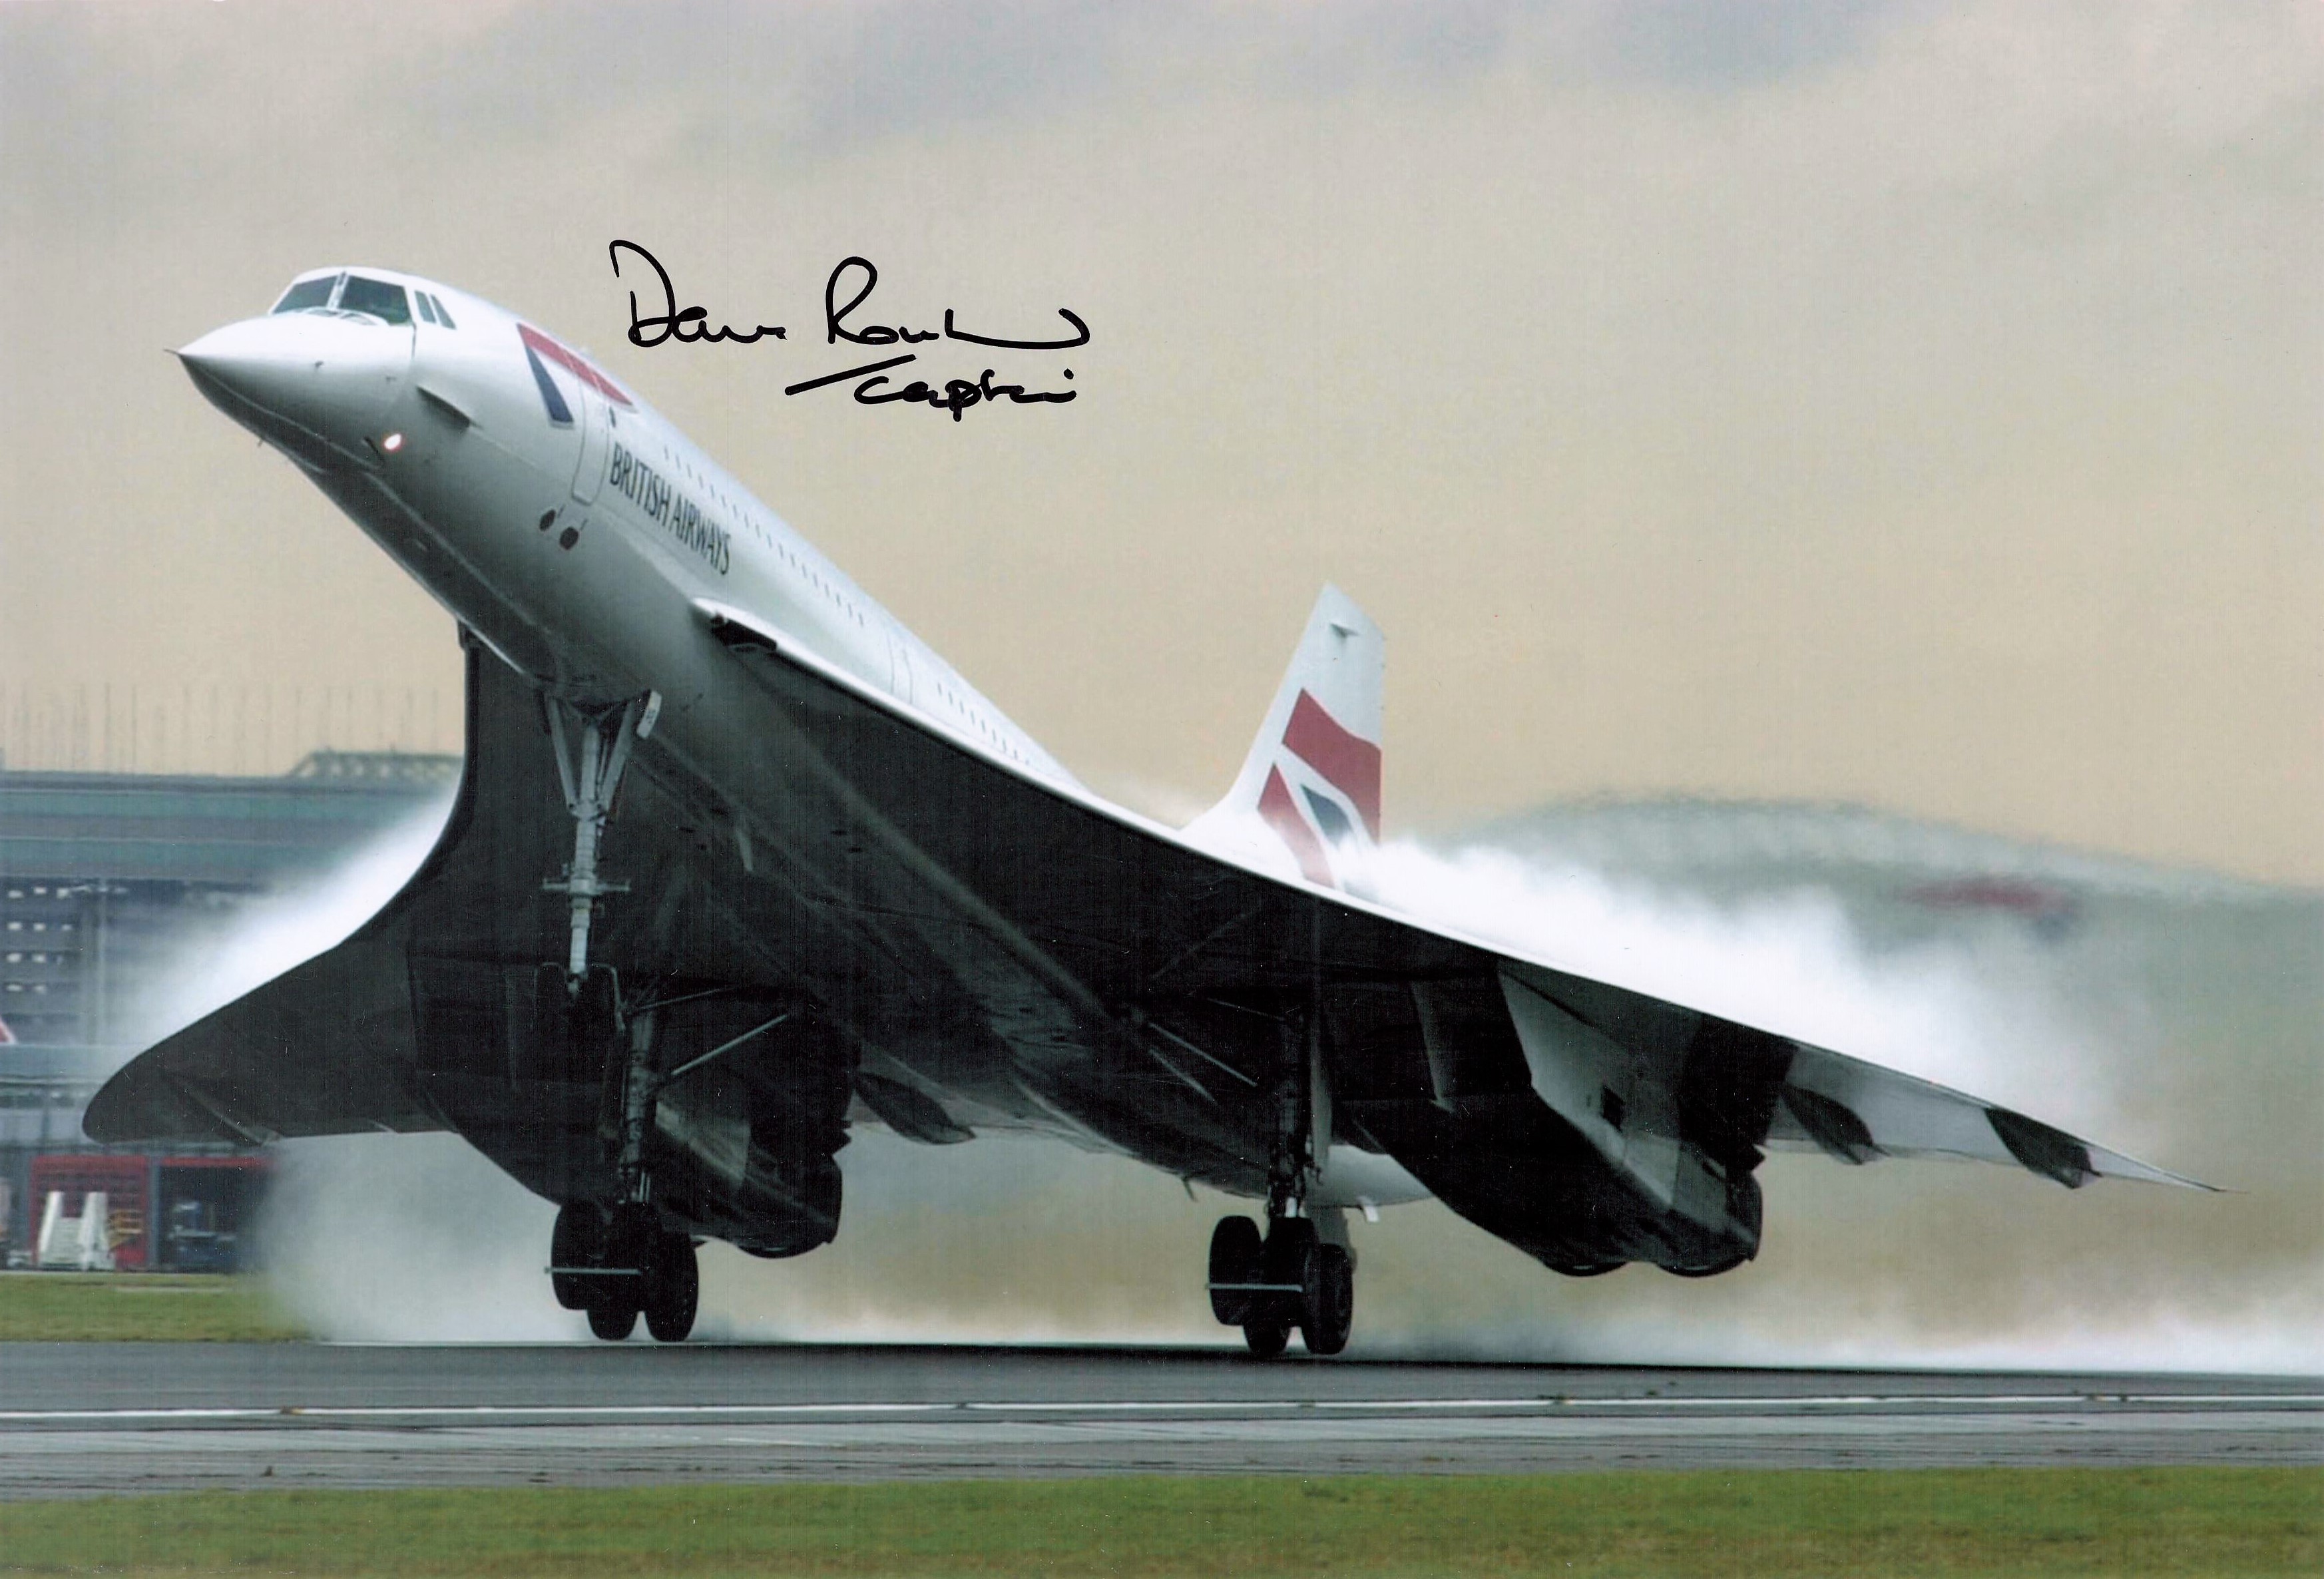 Concorde Captain Dave Rowland signed 12 x 8 inch colour photo. Good condition. All autographs come